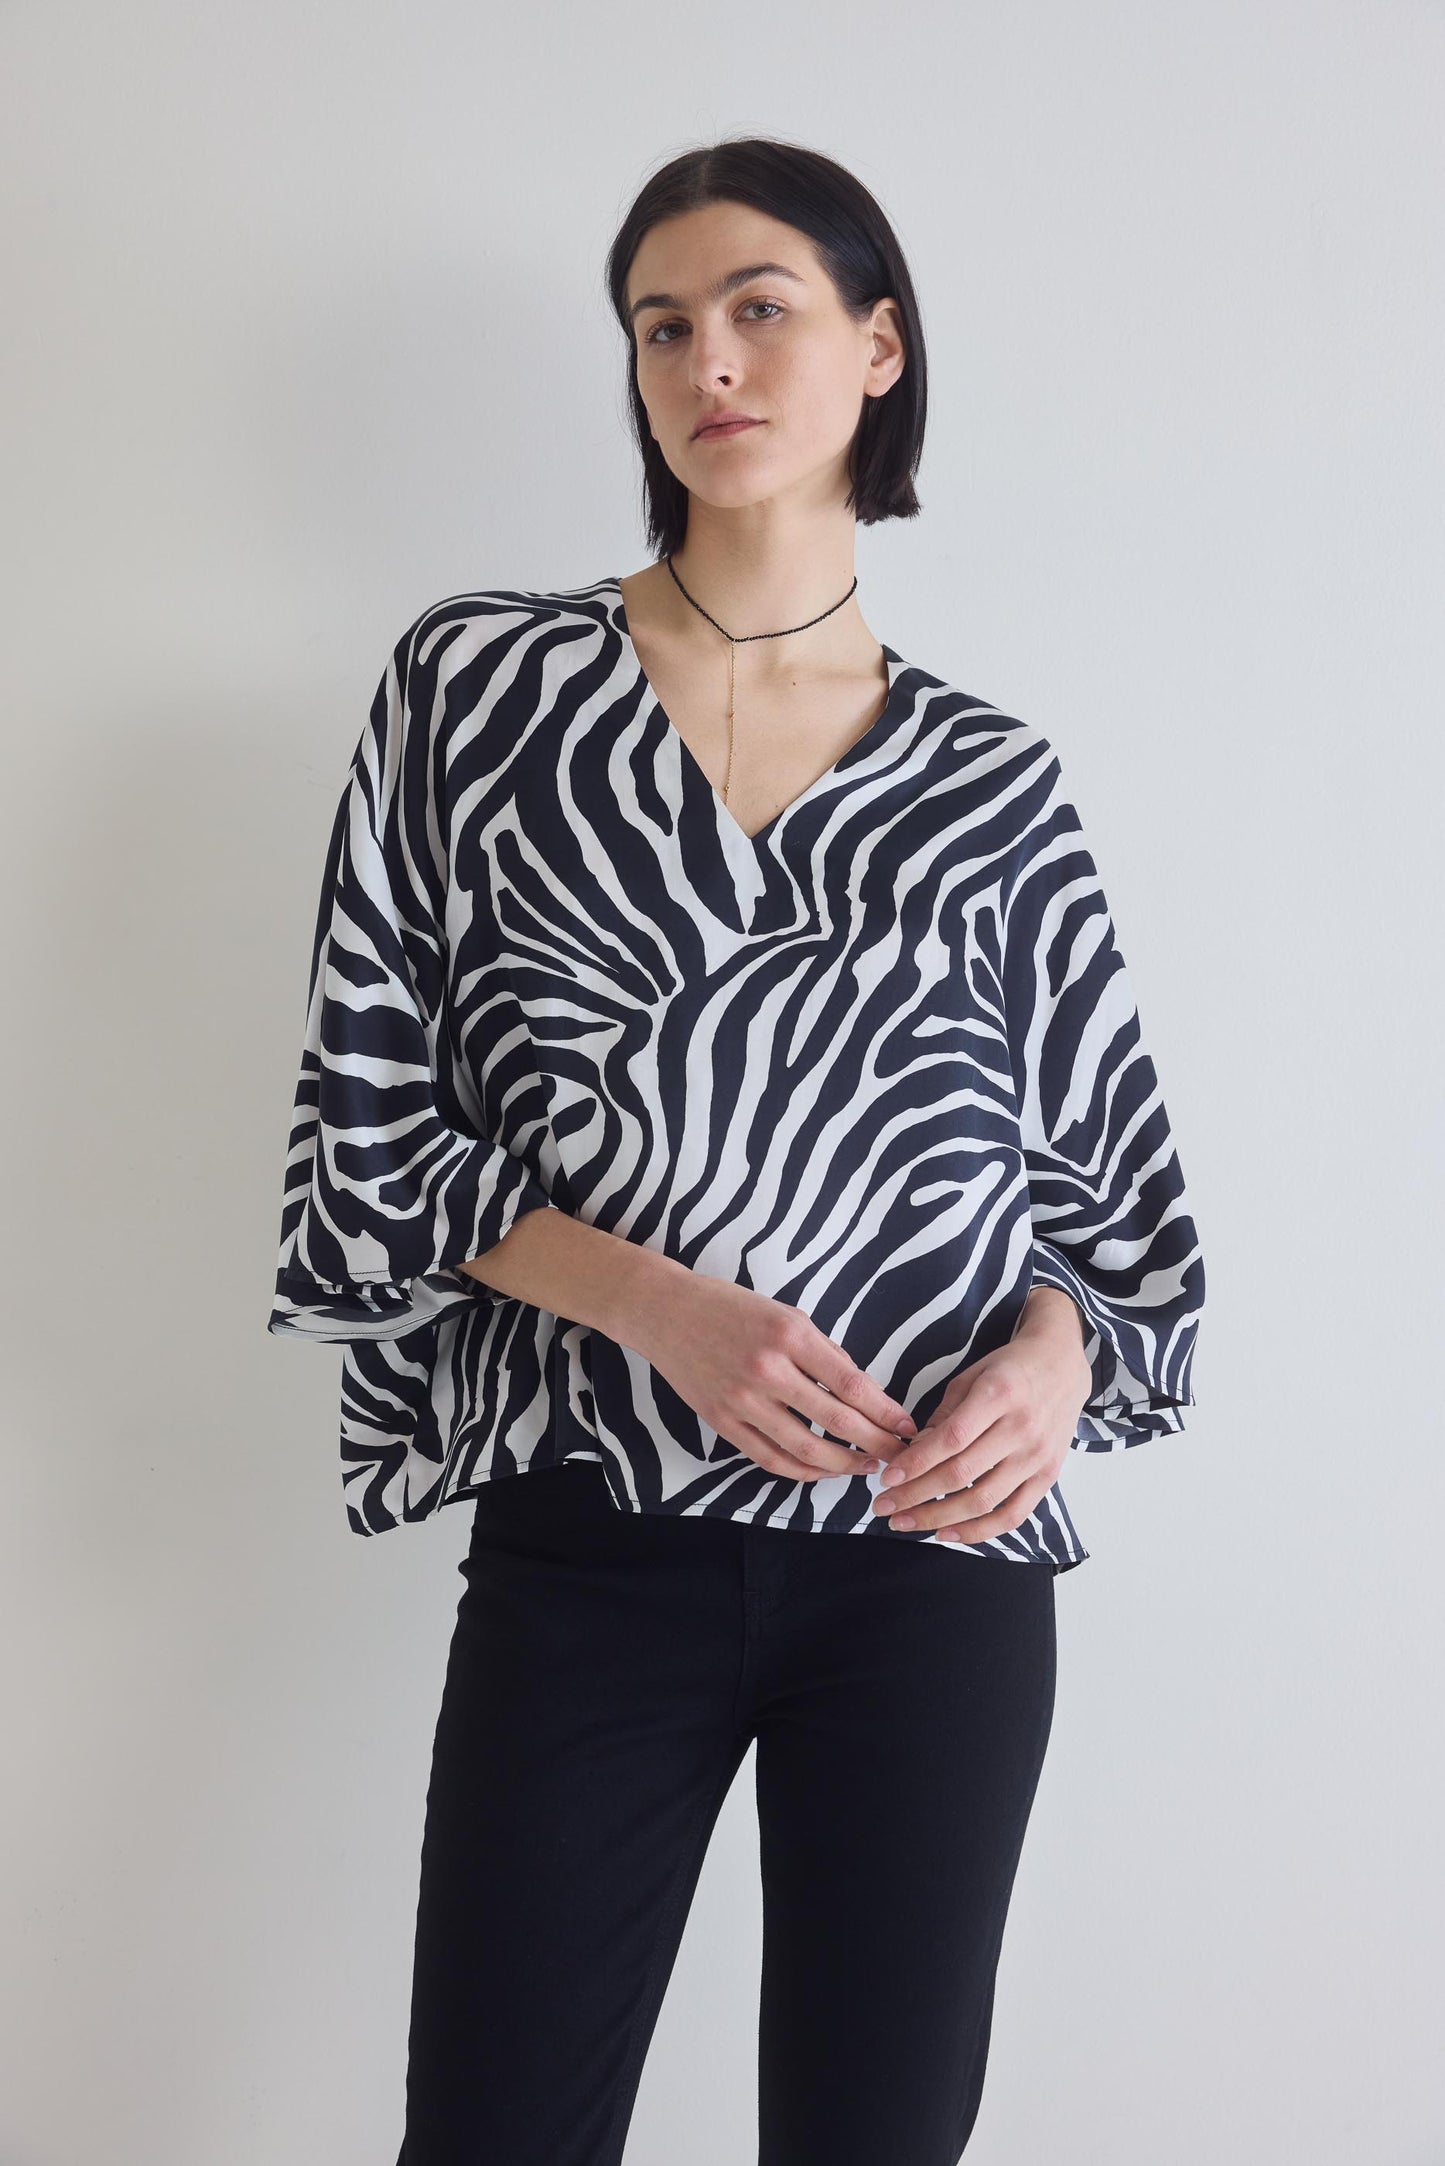 The Batwing Silk Top